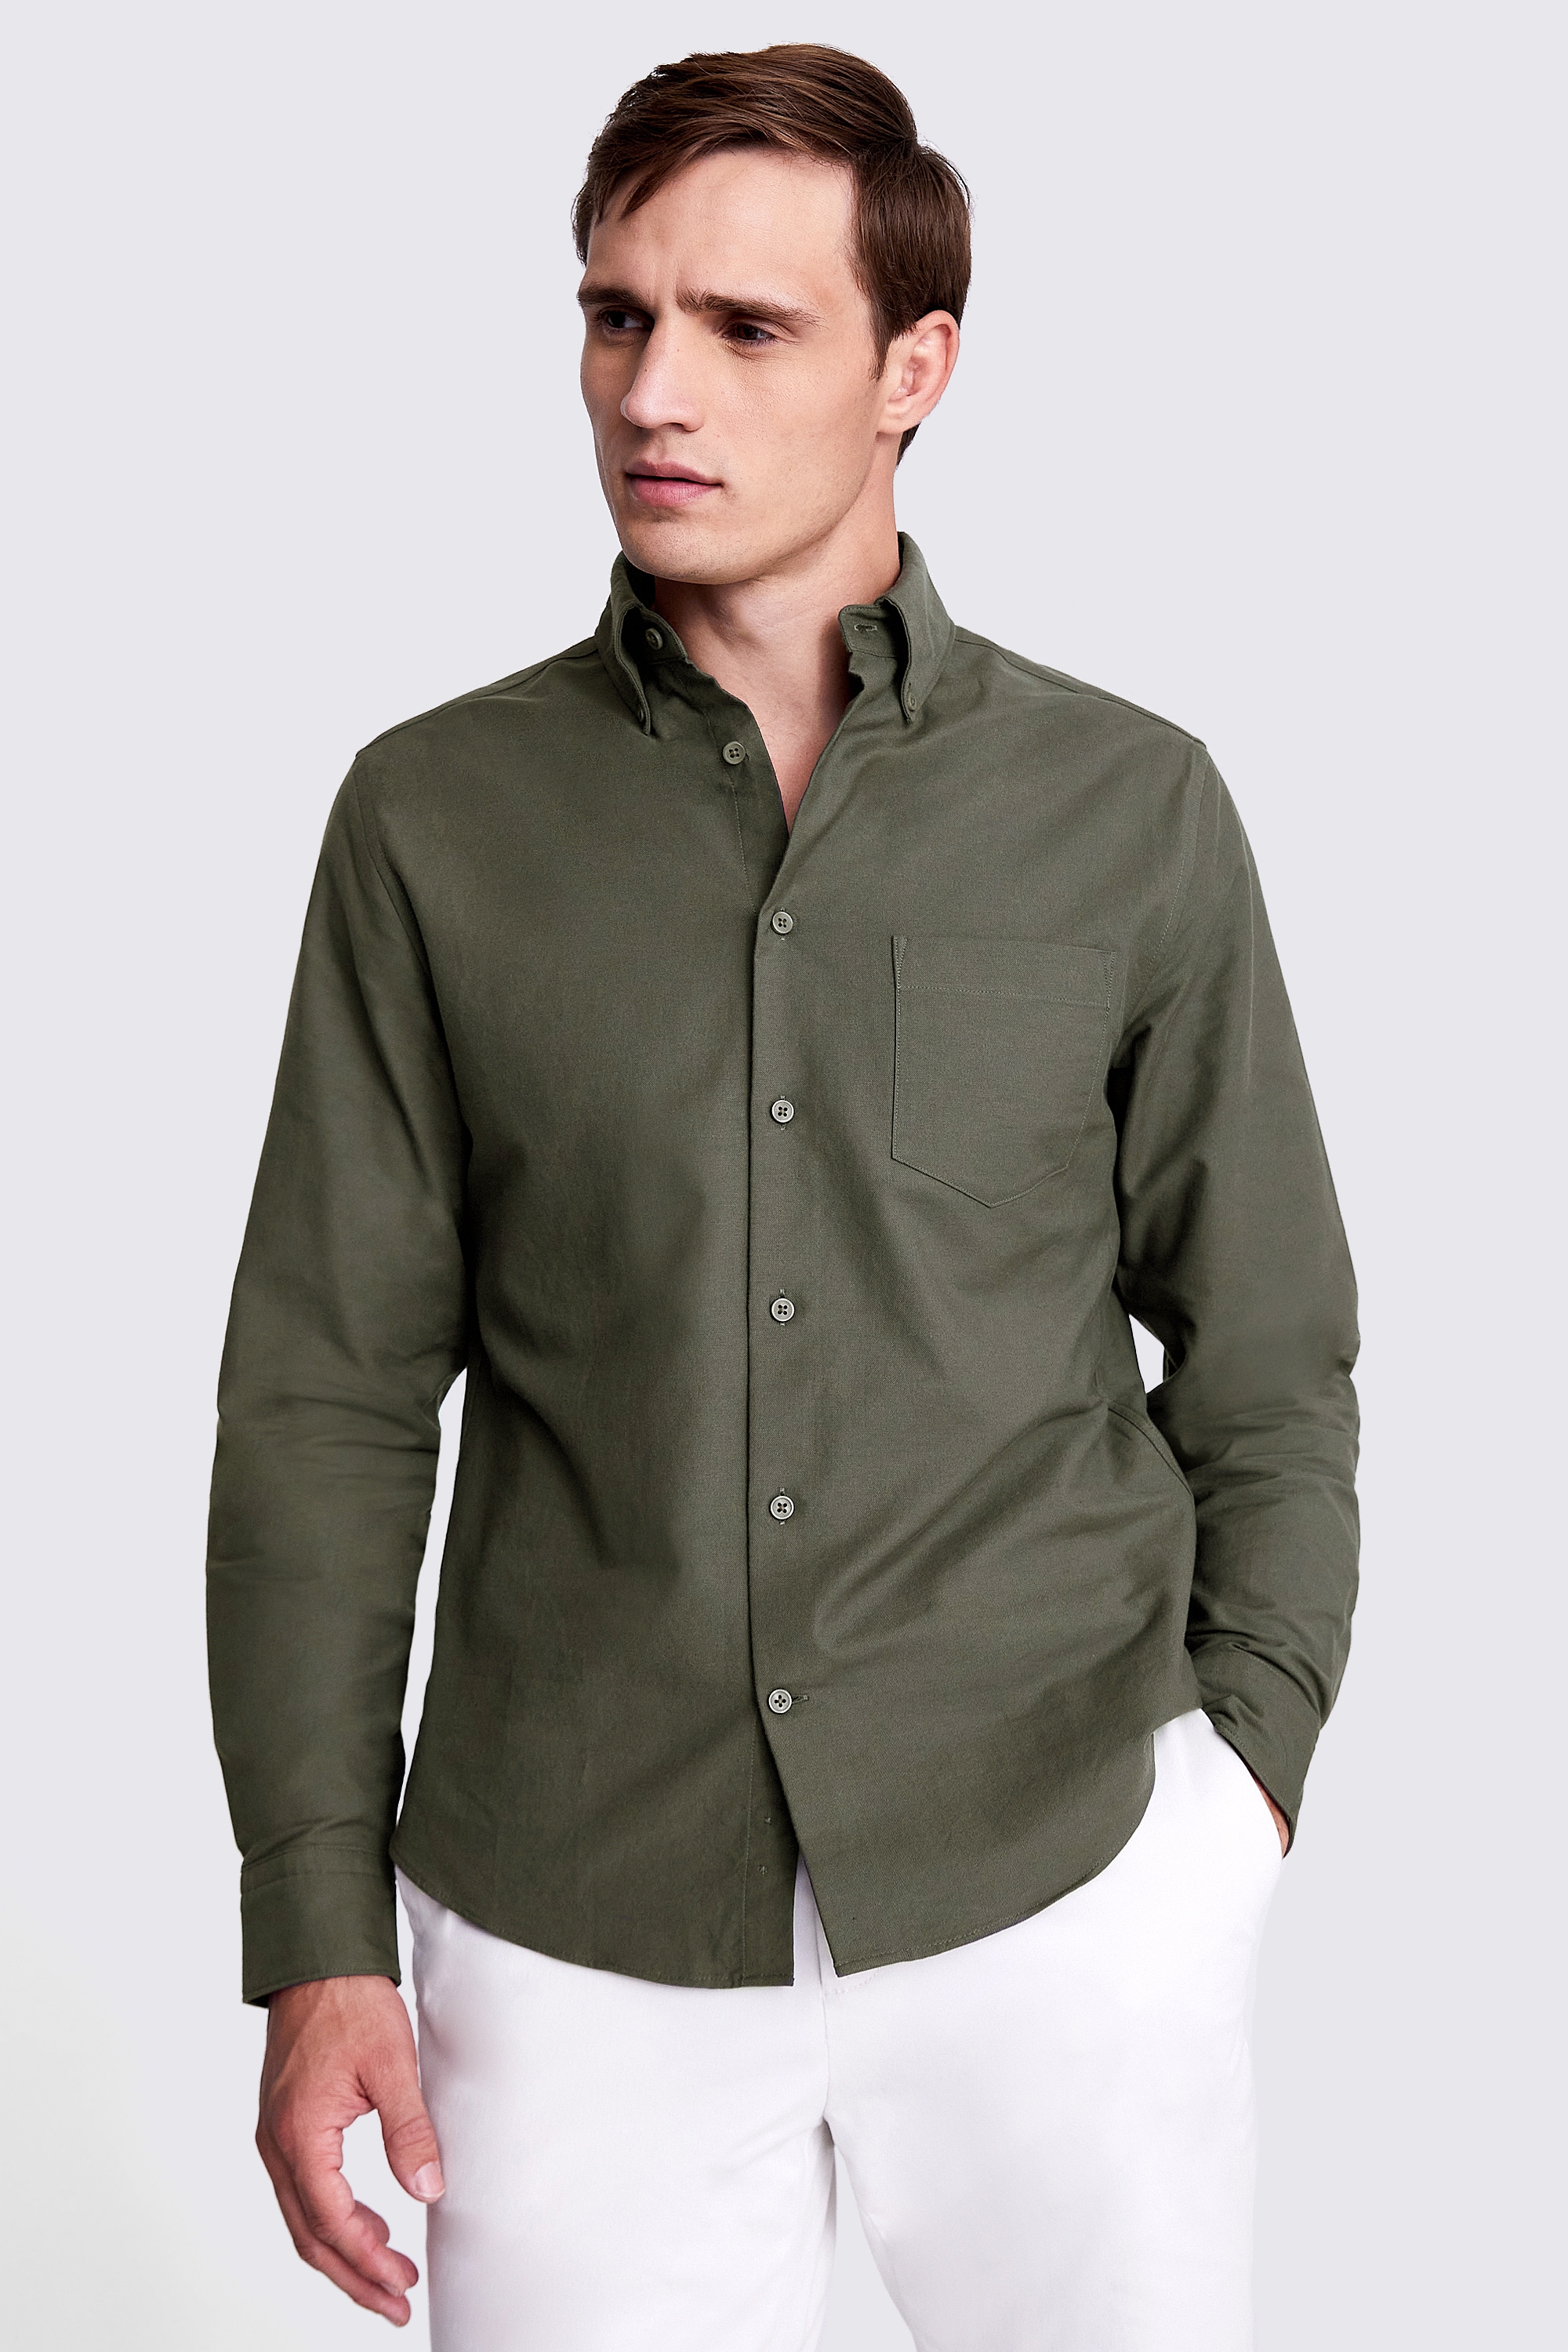 Dark Green Washed Oxford Shirt | Buy Online at Moss